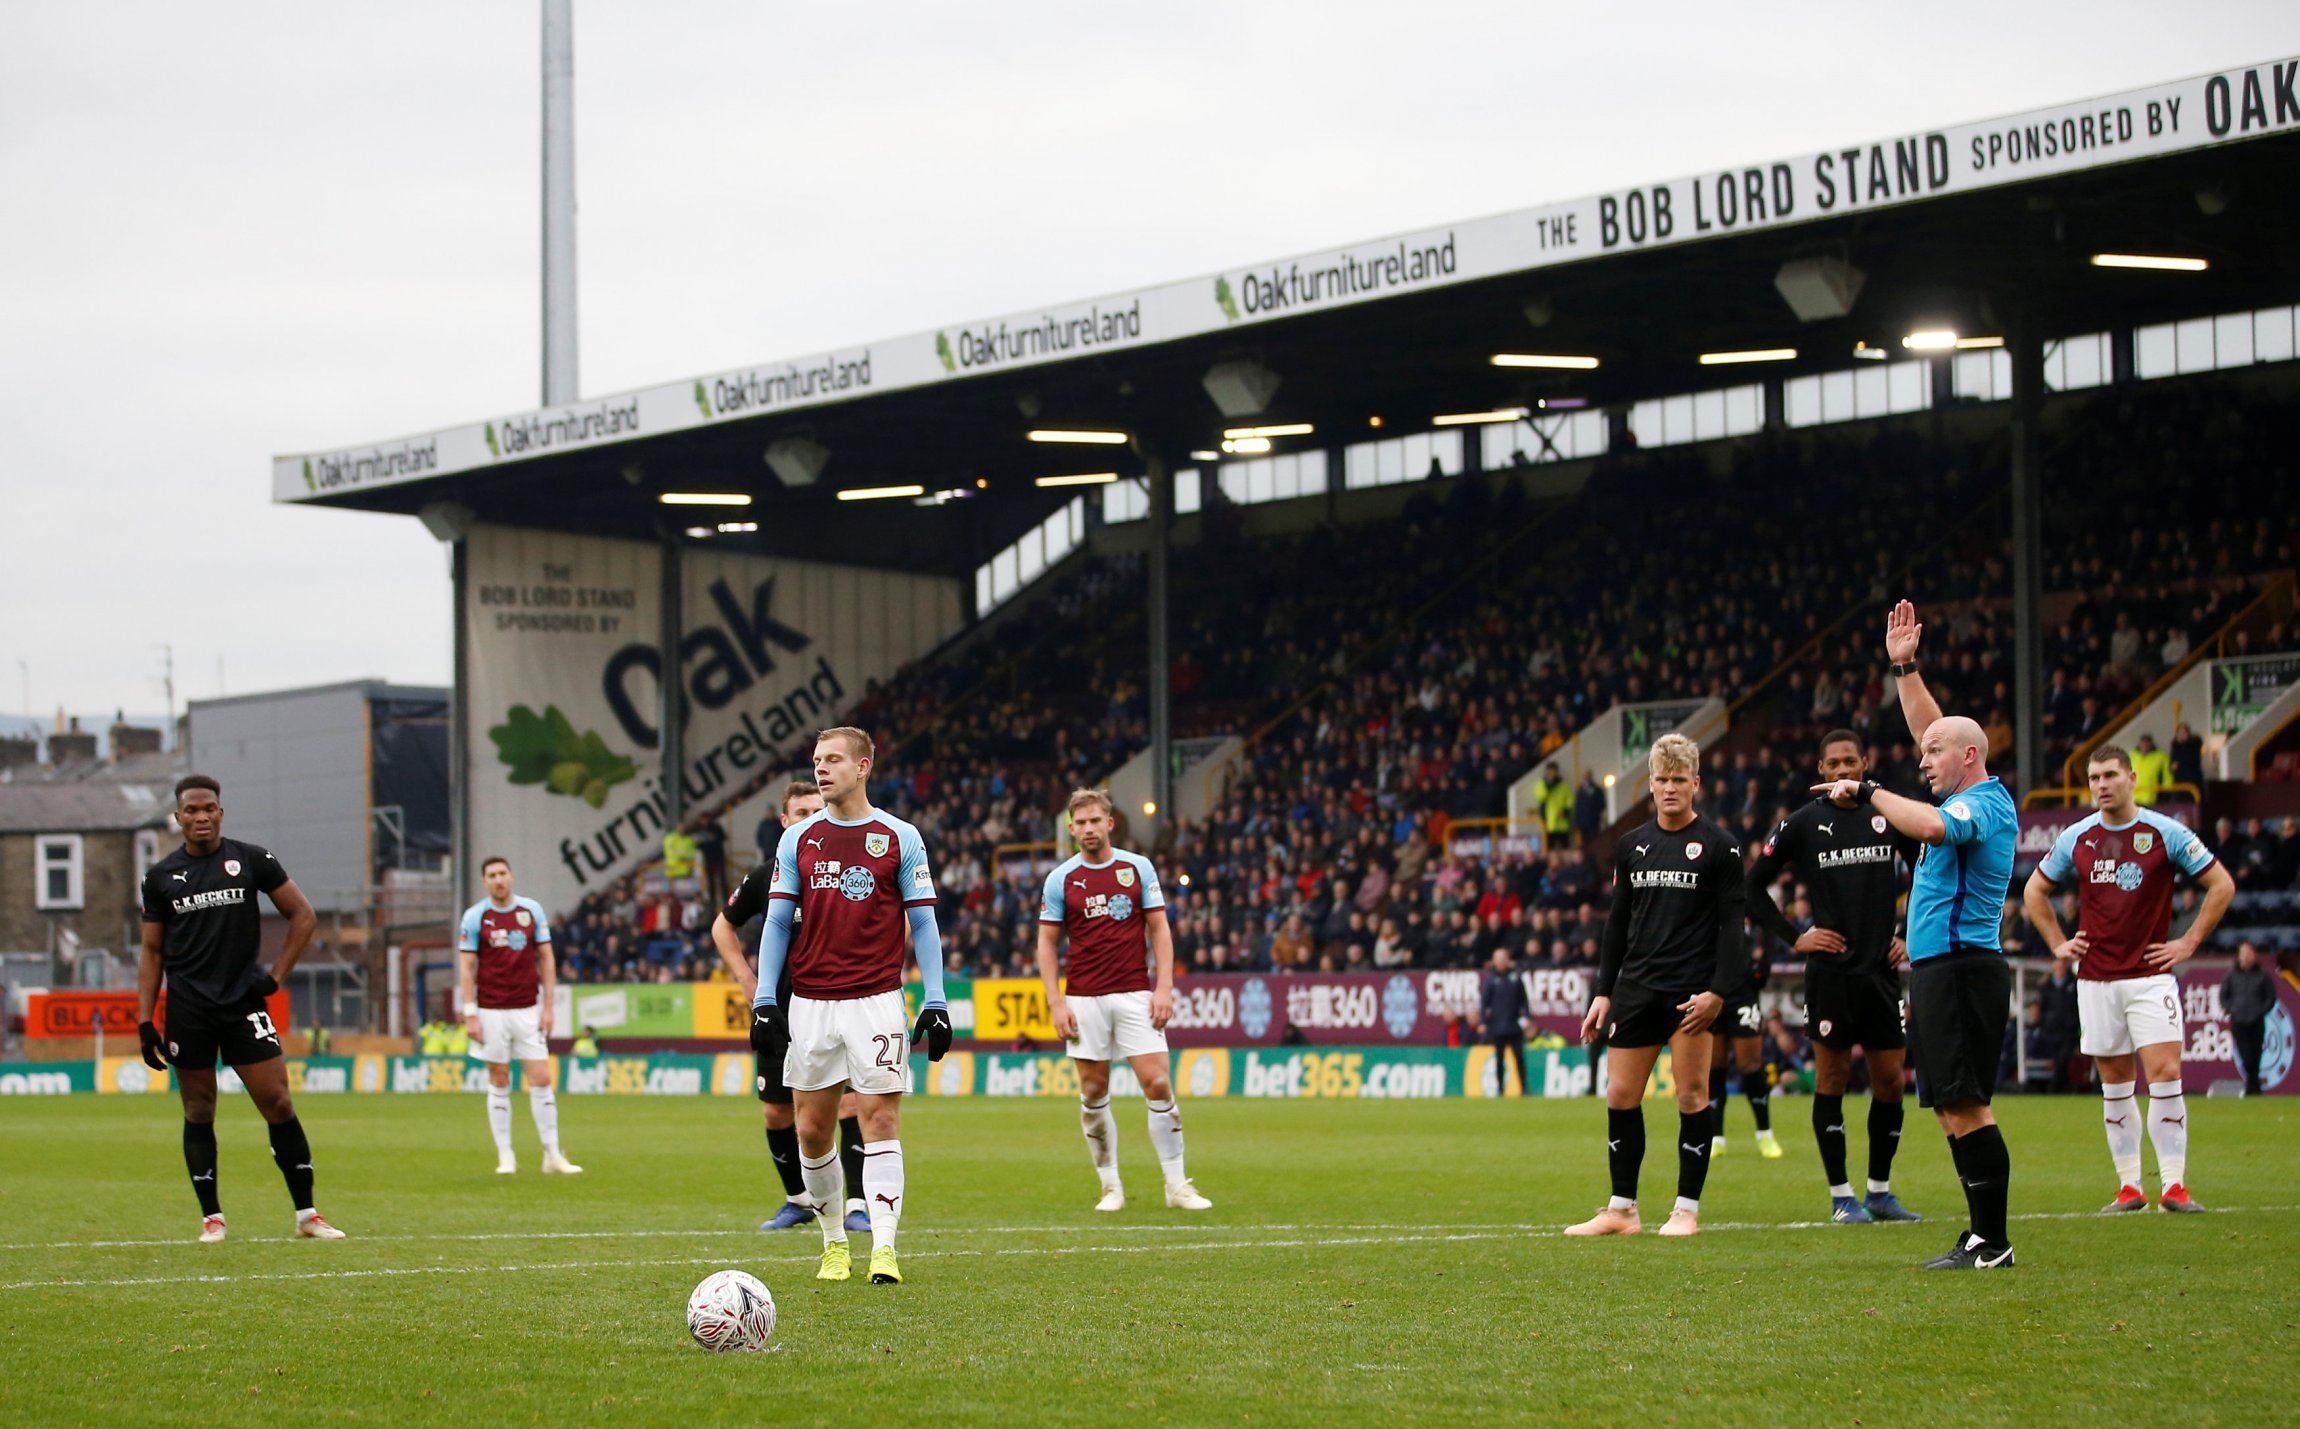 Burnley's Matej Vydra waits to take a penalty which is later overturned by VAR